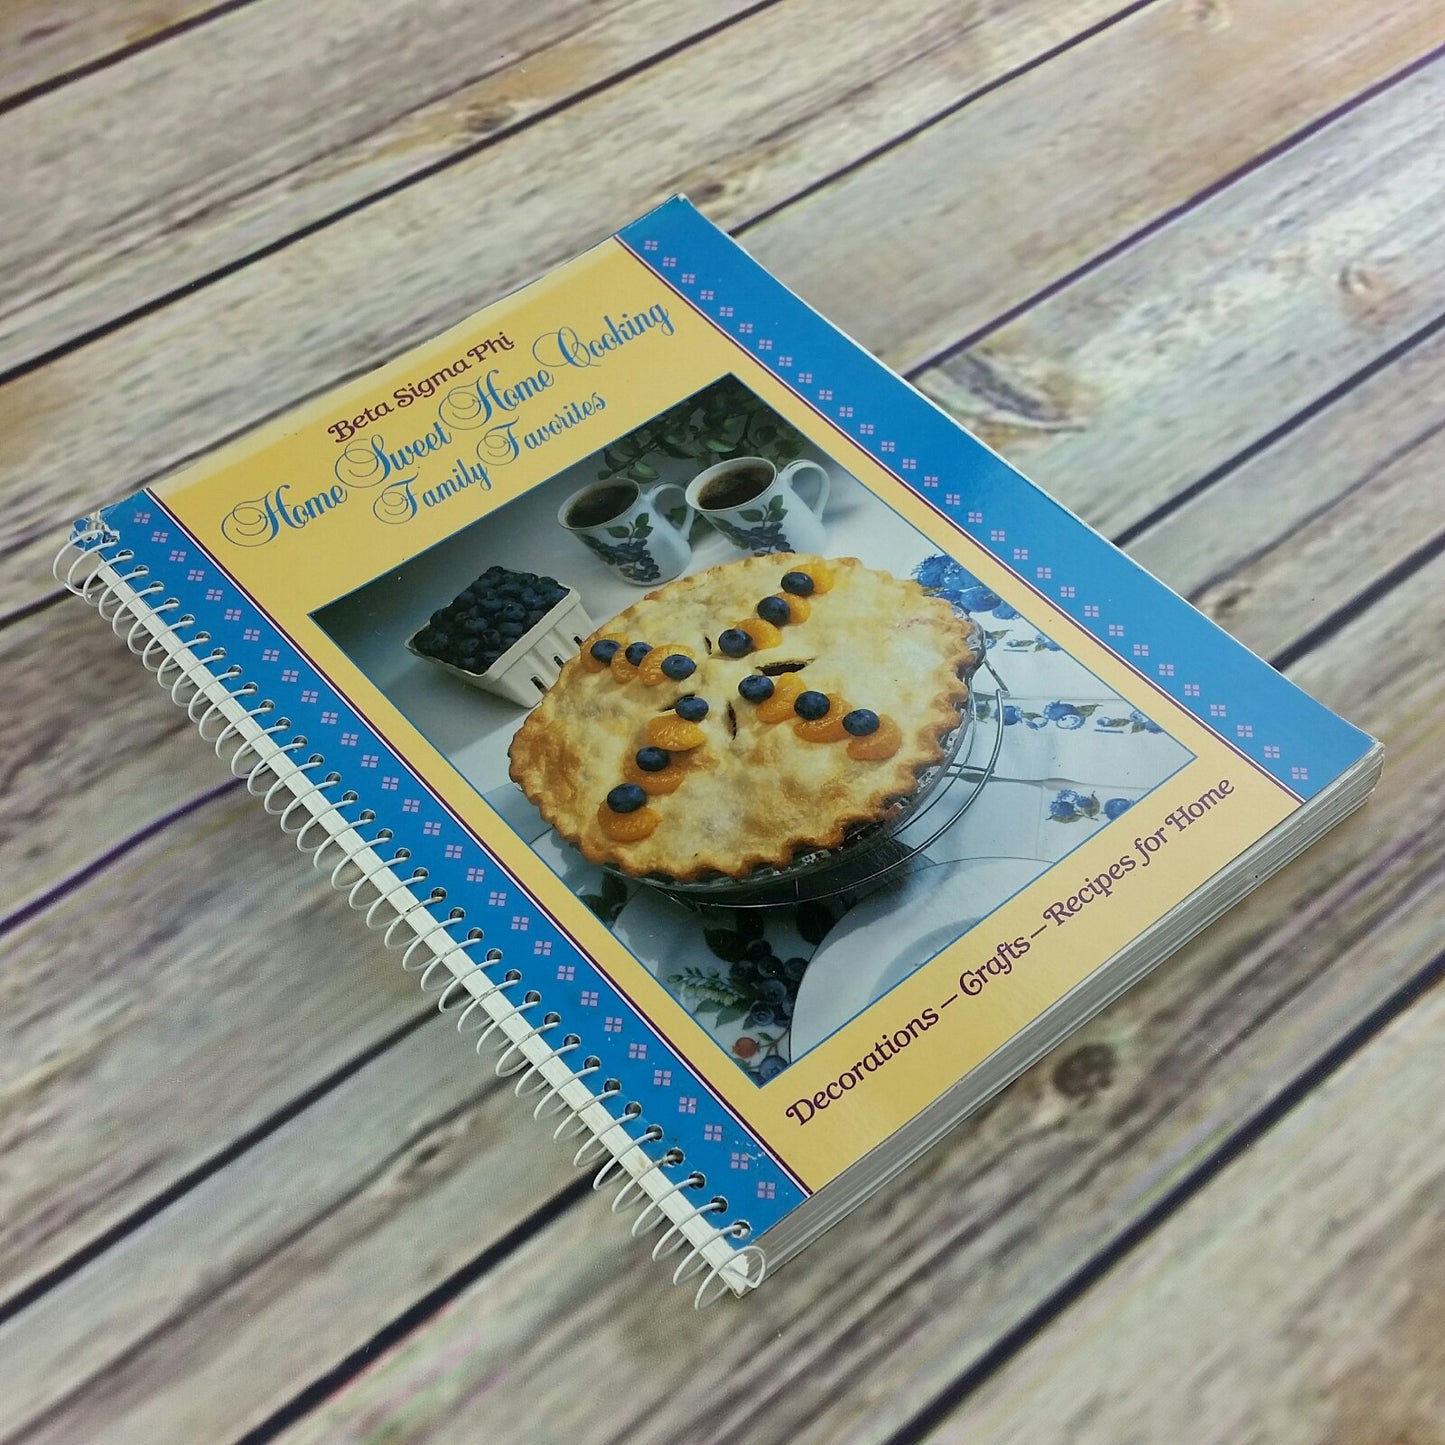 Vintage Cookbook Beta Sigma Phi Home Sweet Home Cooking Family Favorites 1993 - At Grandma's Table